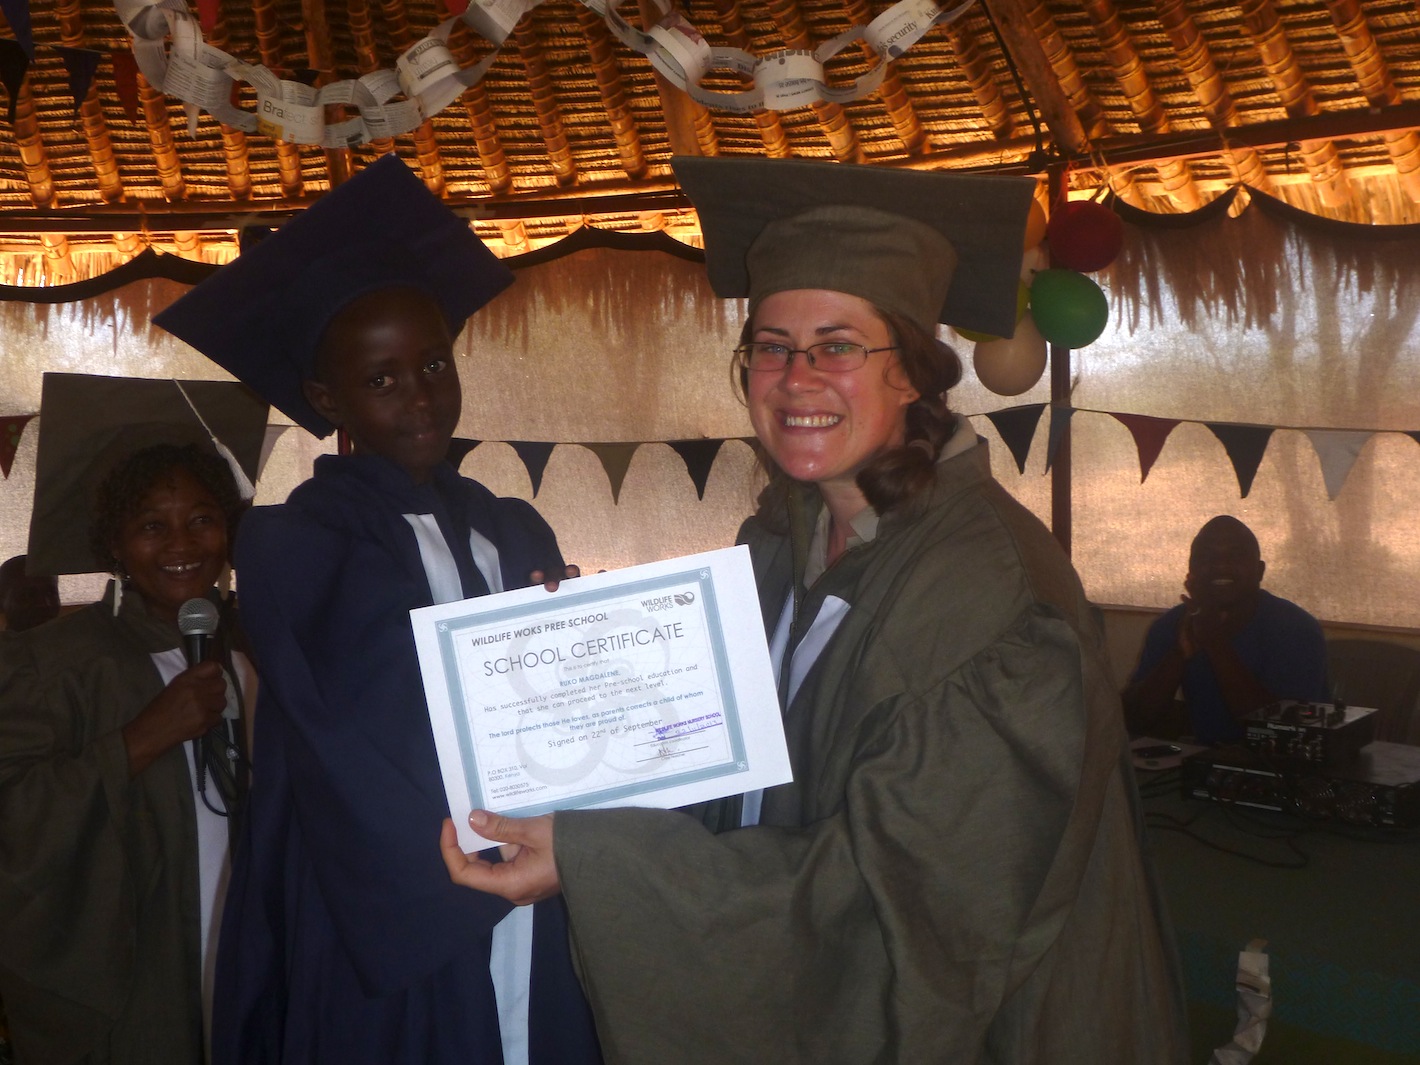 A graduating student receives a certificate